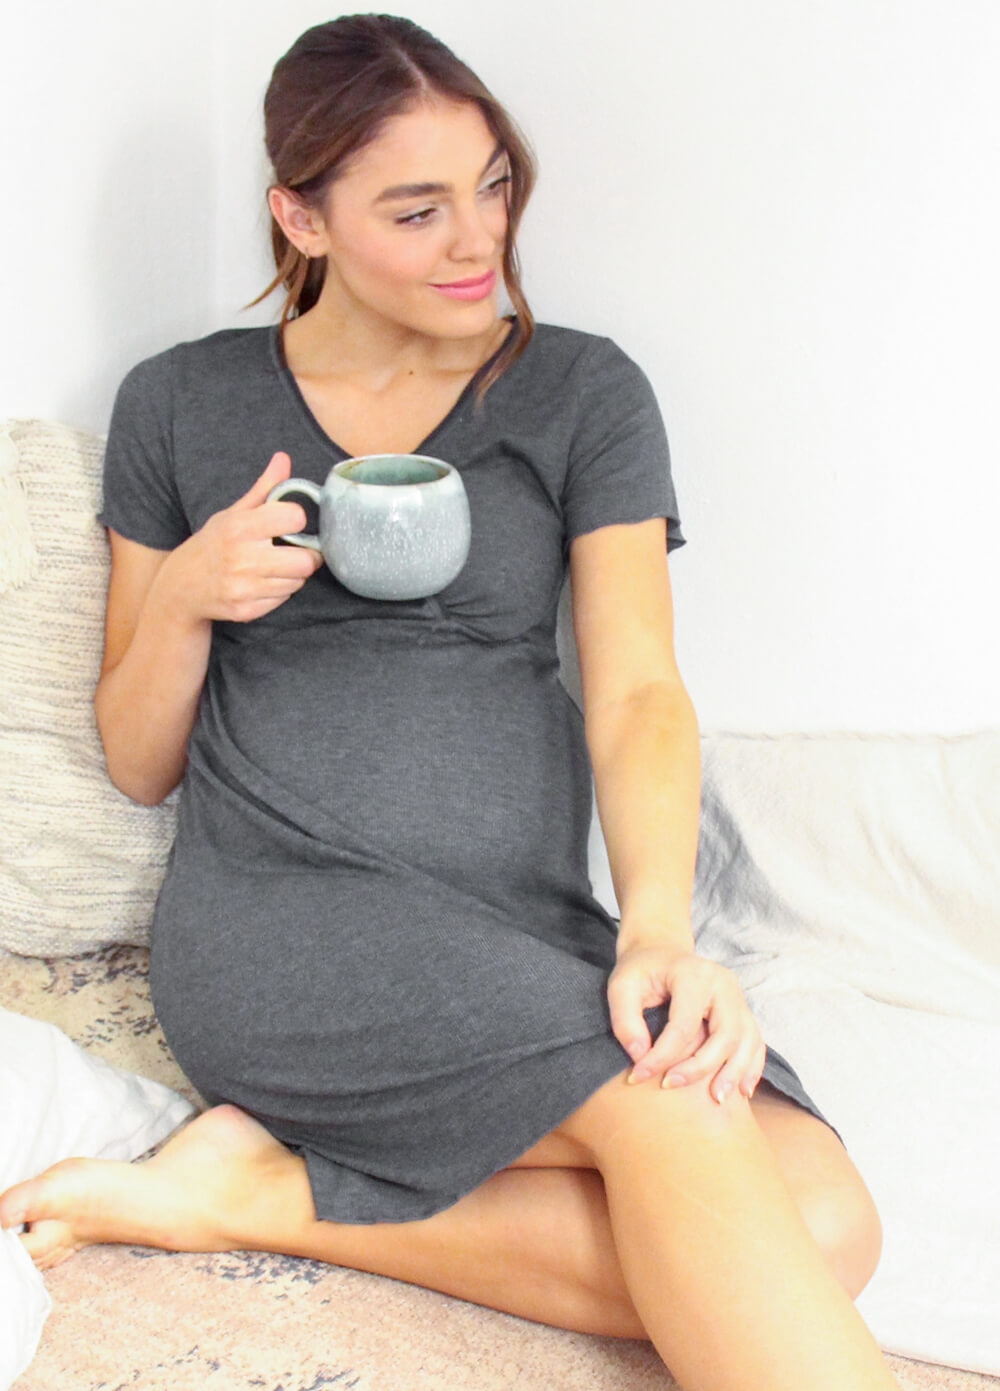 Lait & Co - Lavern 'Precious Times' Lounge Dress in Charcoal